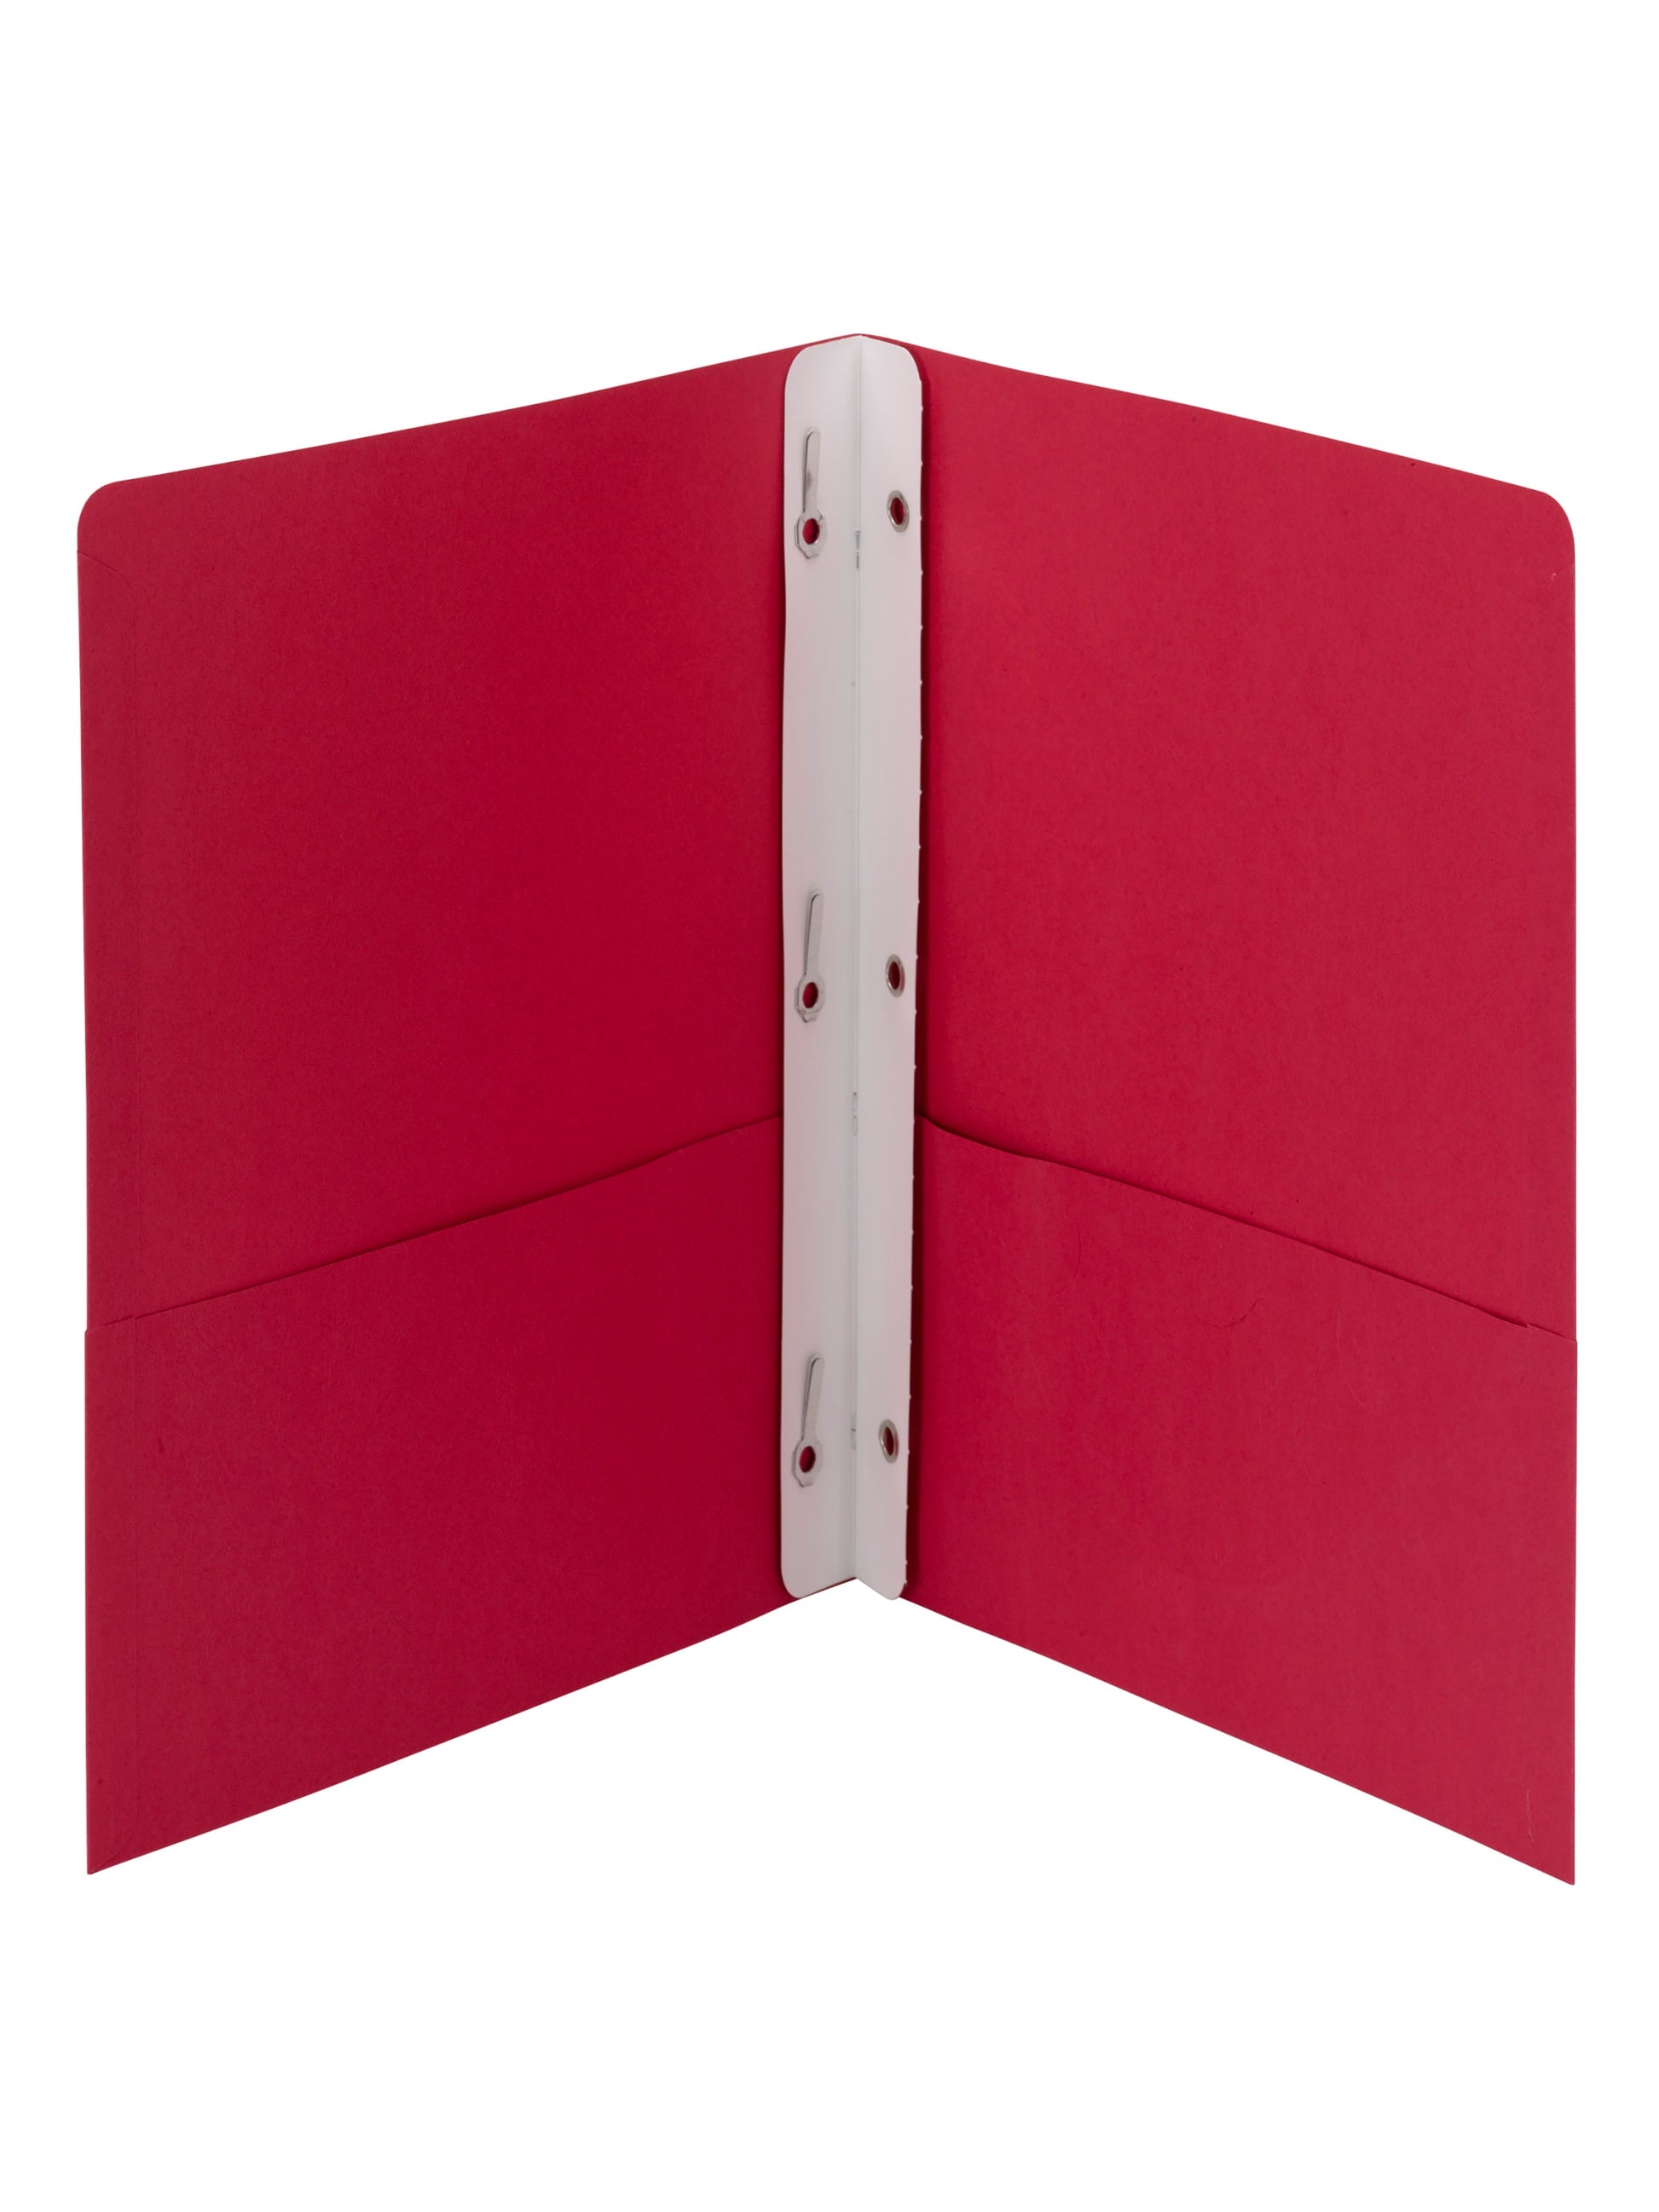 Two-Pocket Folders with Fasteners, Red Color, Letter Size, Set of 0, 30086486880597